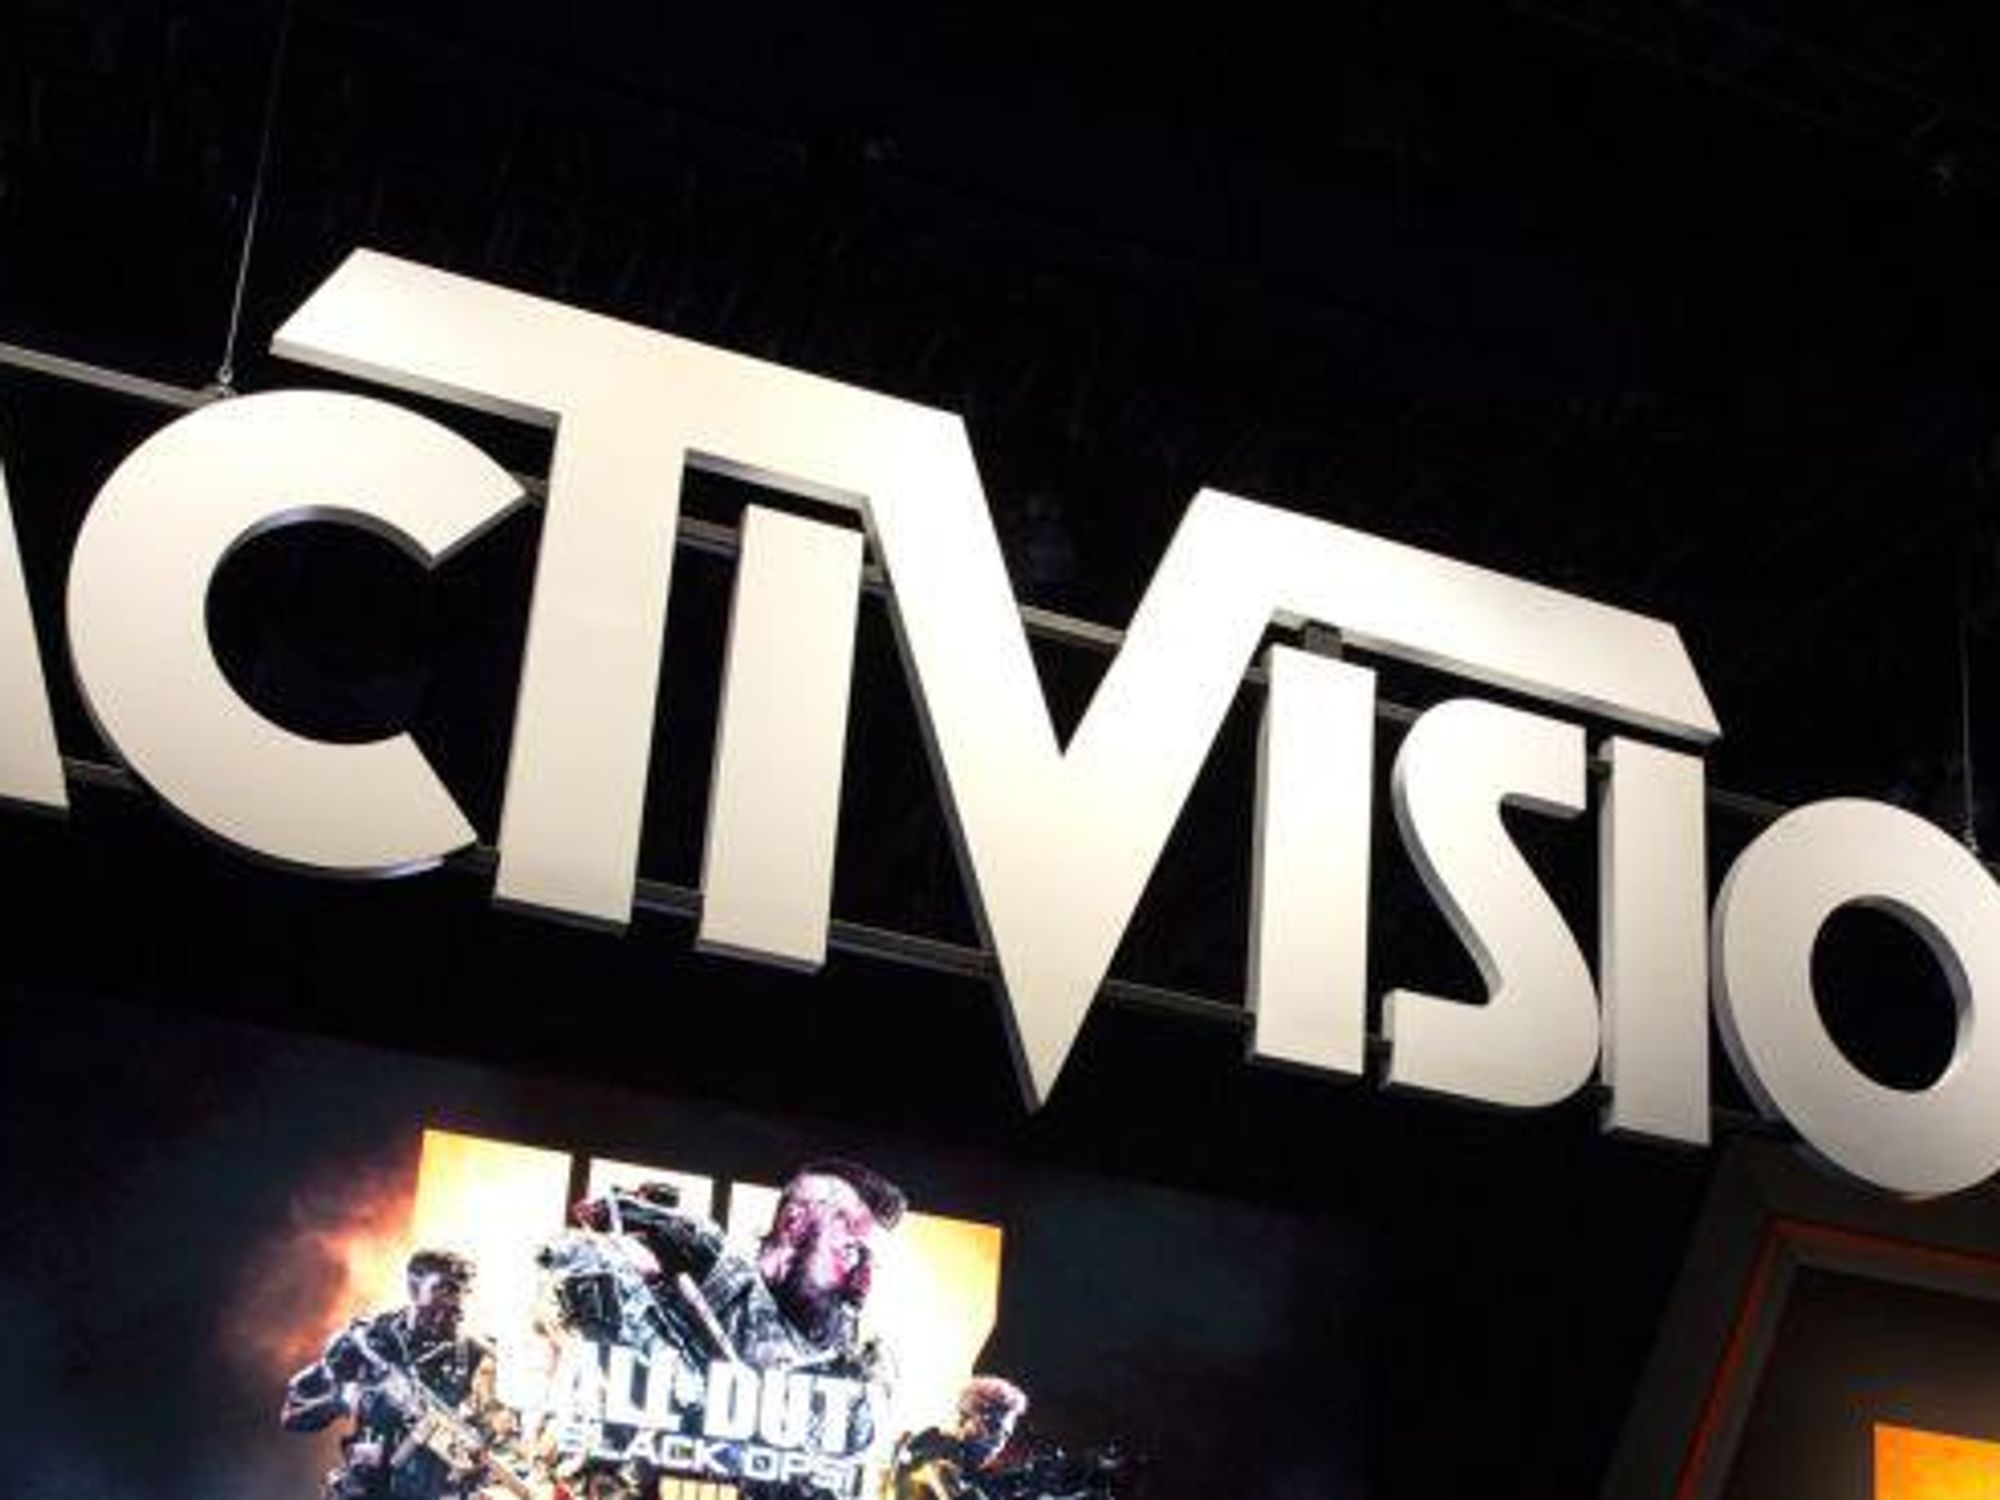 Activision Blizzard CEO Bobby Kotick Responds to Lawsuit, Calls